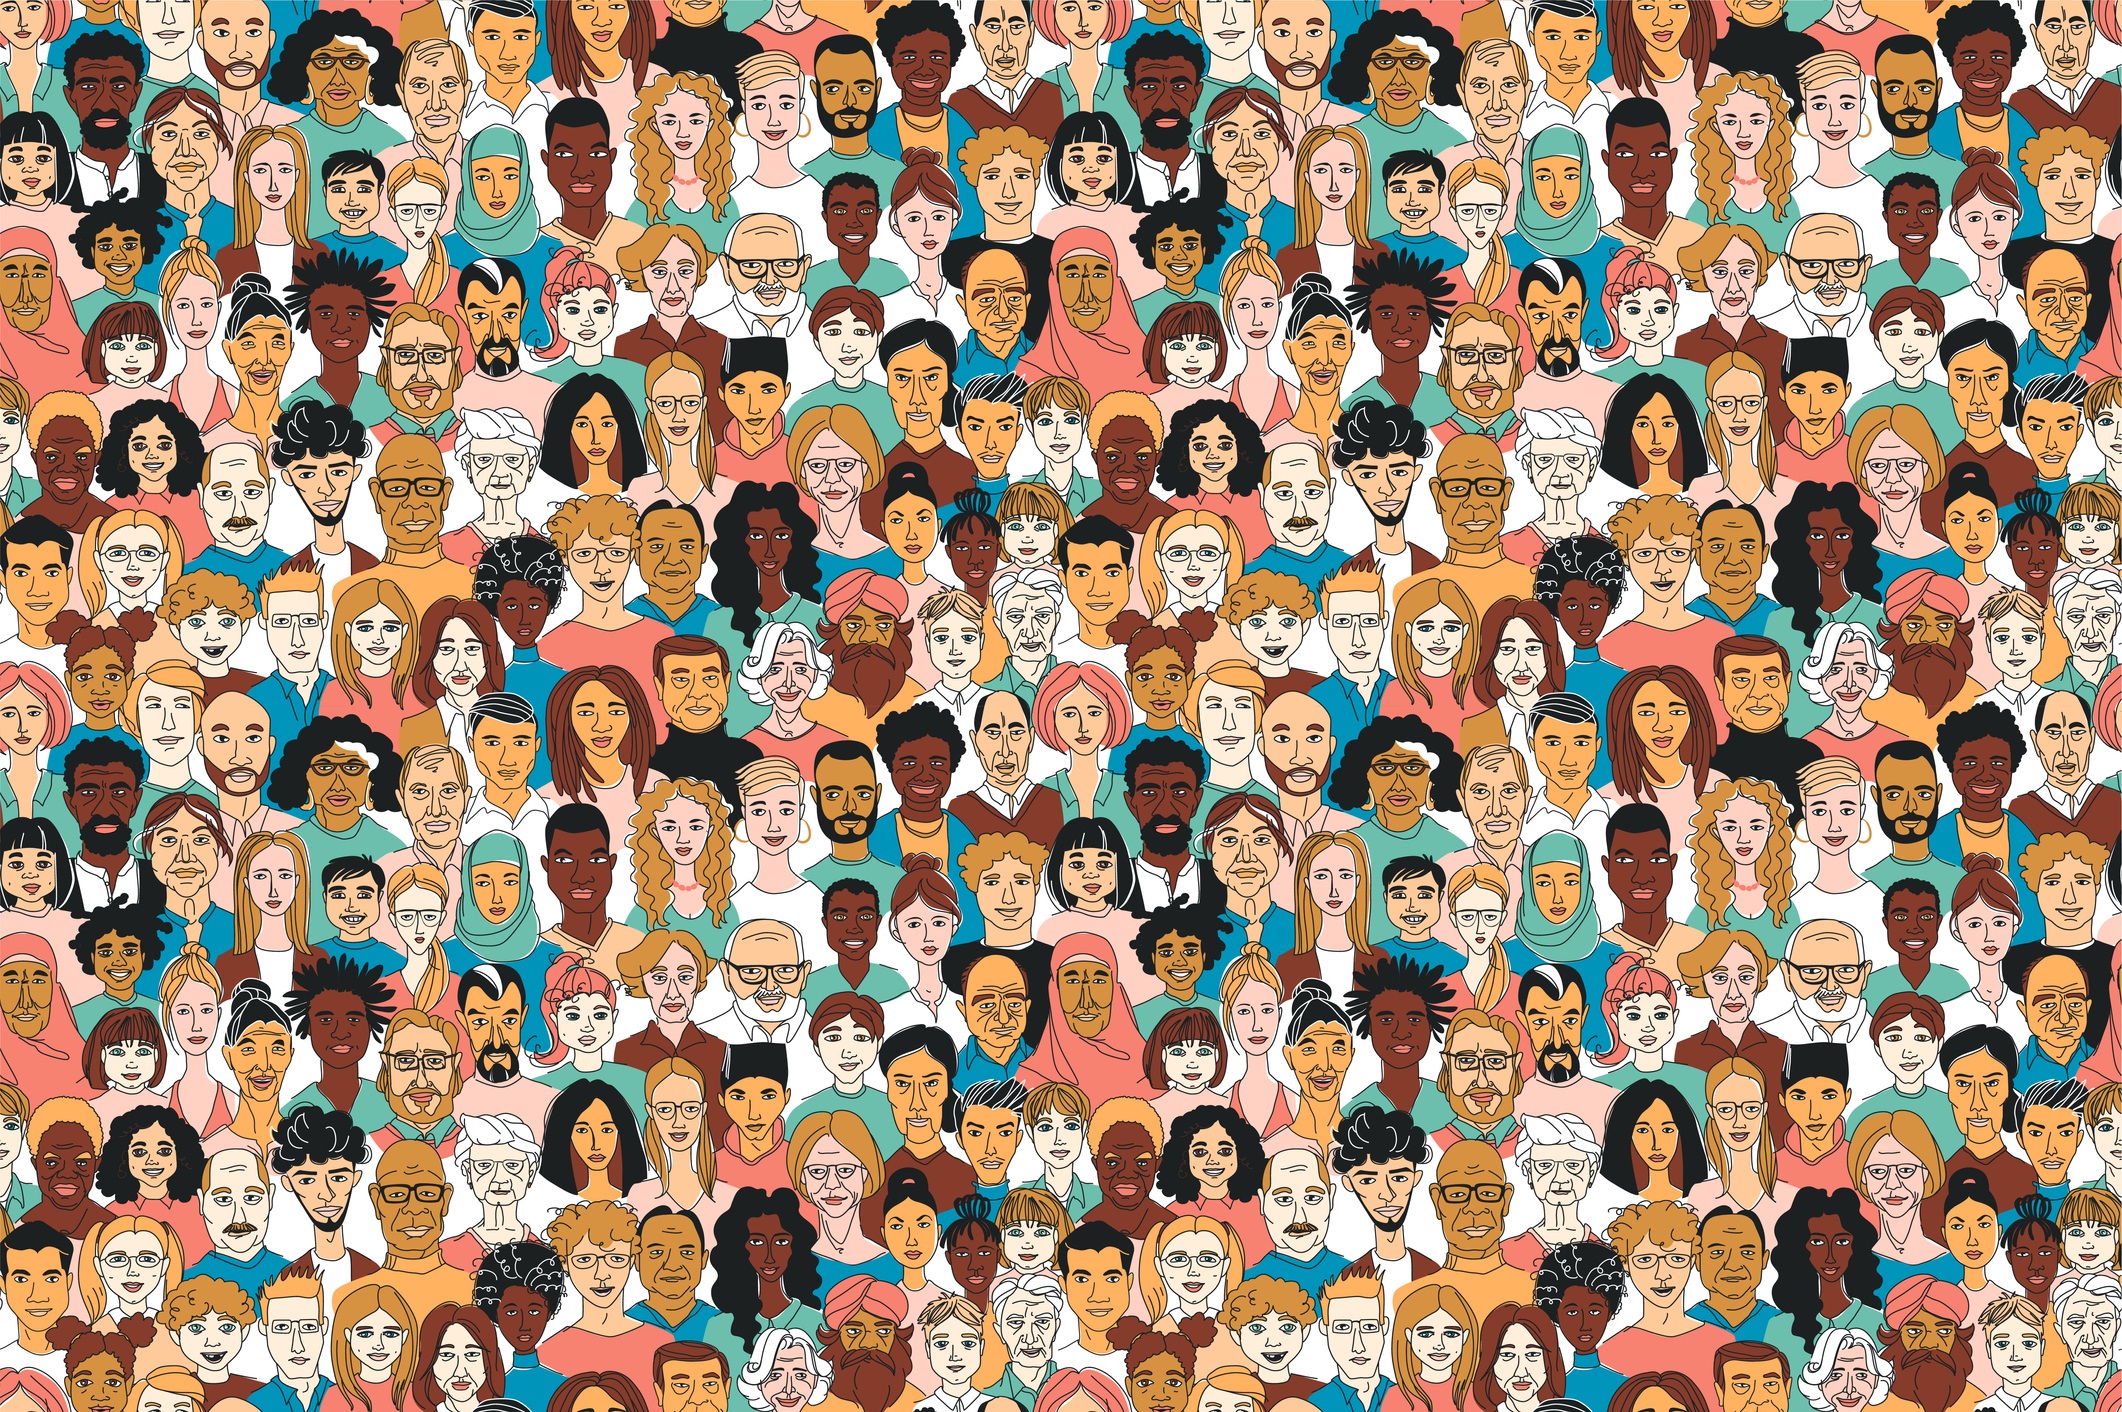 illustration of ethnically diverse group of people